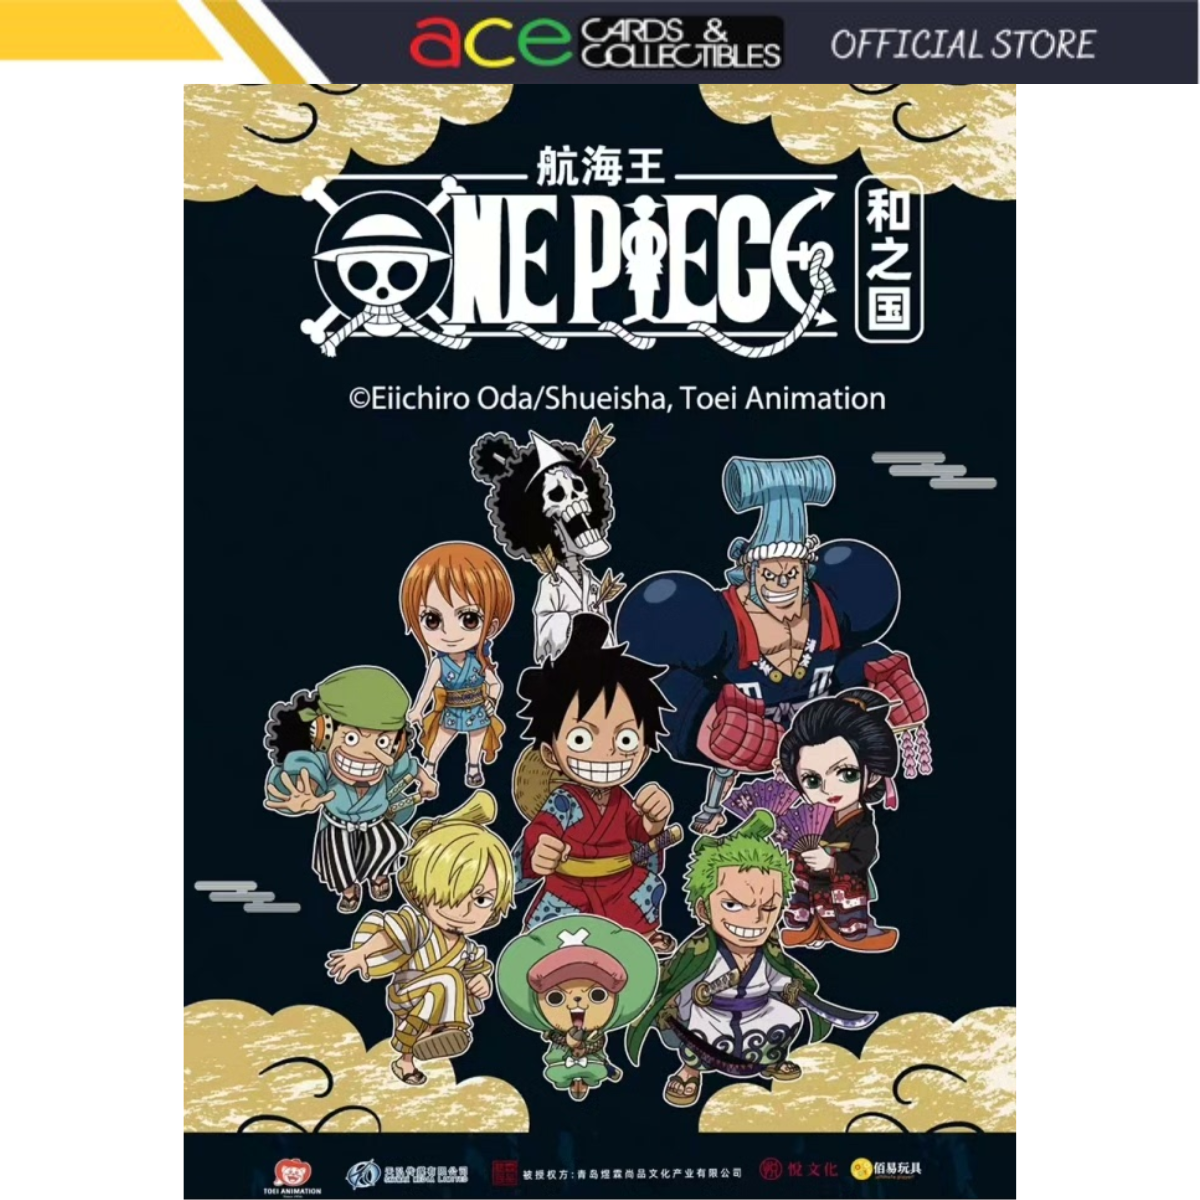 Toei Animation x One Piece Wano Country Metal Keychain-Single Box (Random)-Toei Animation-Ace Cards &amp; Collectibles